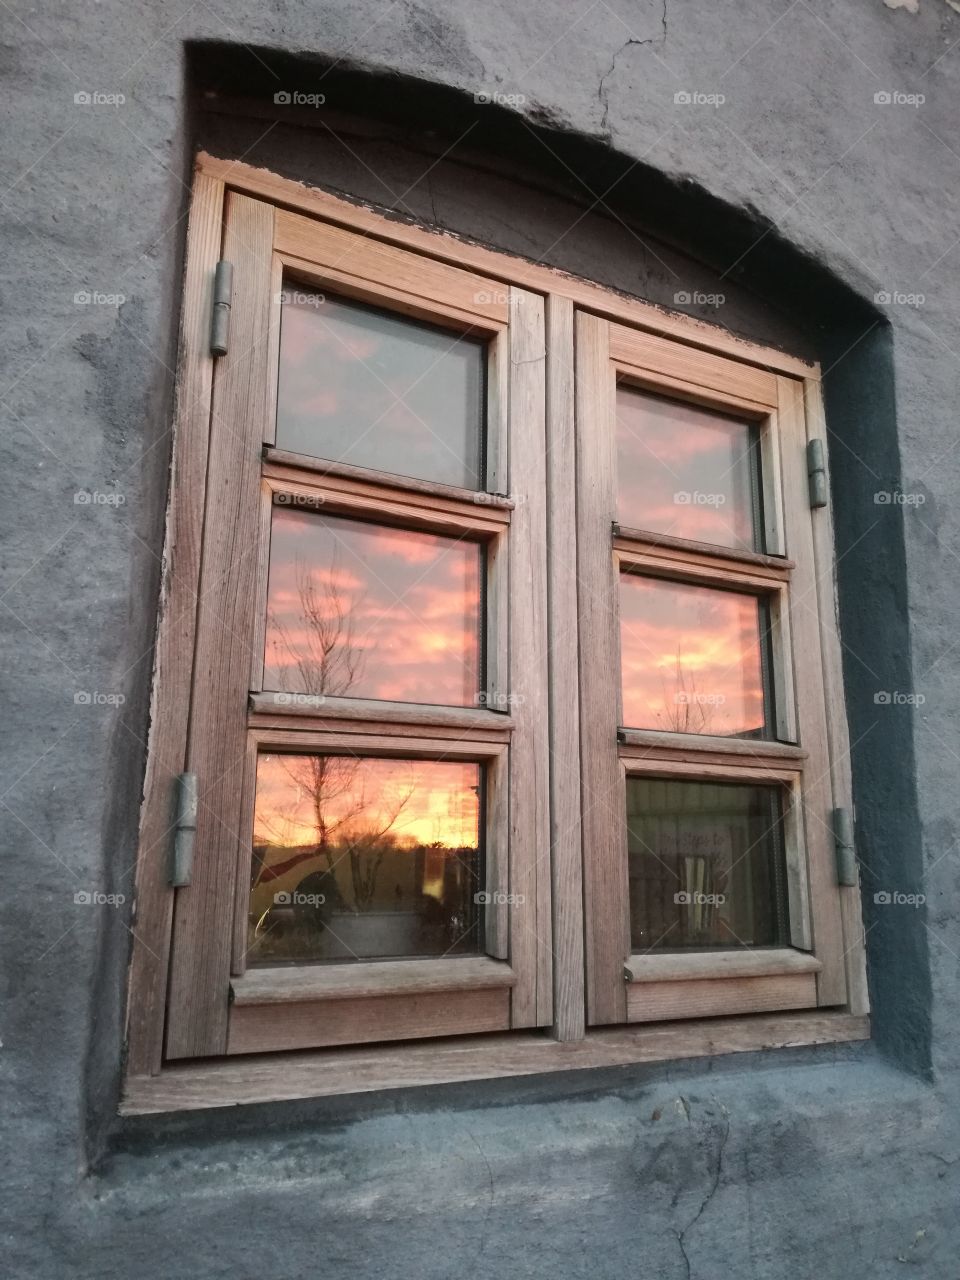 Sunset reflected on glass